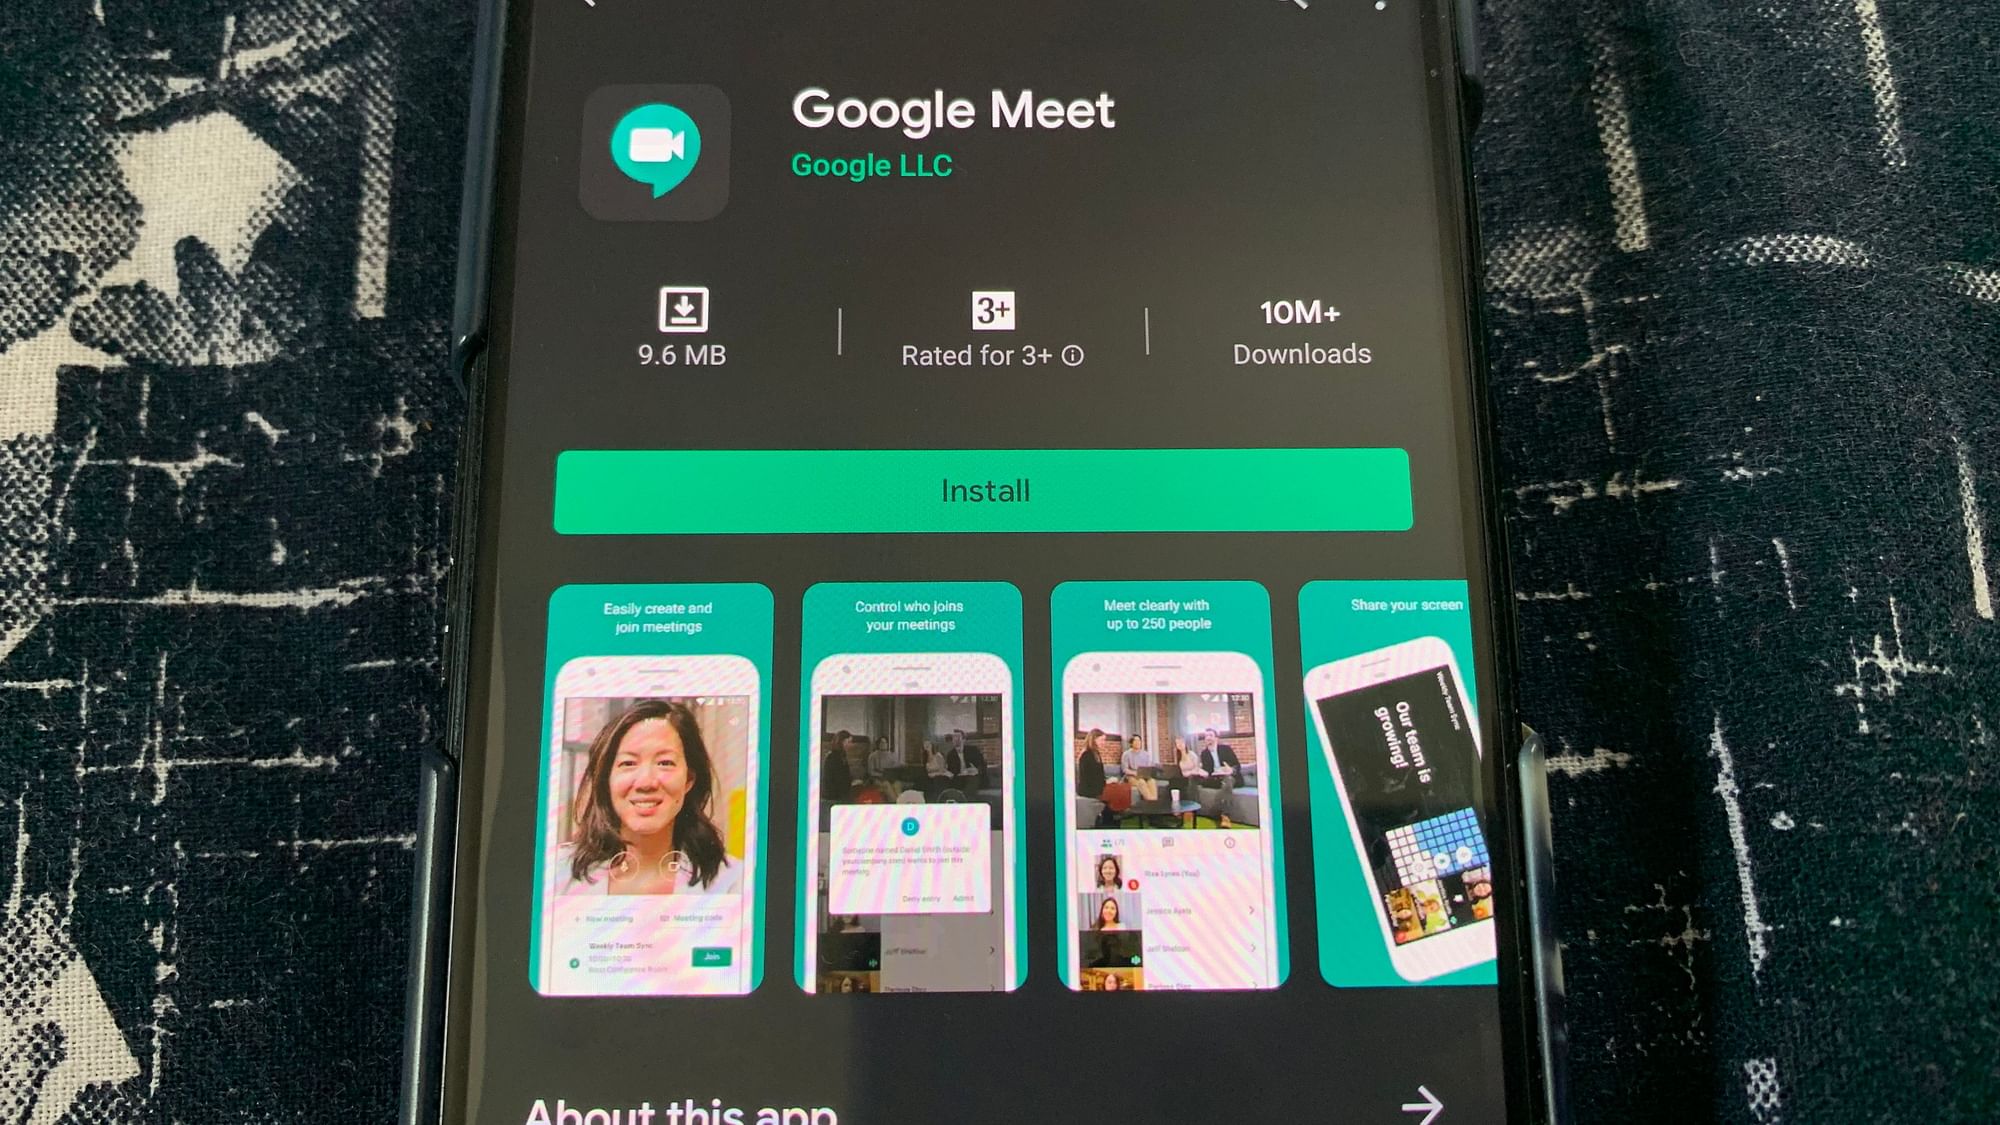 Google Meet is now available for all users as a free service.